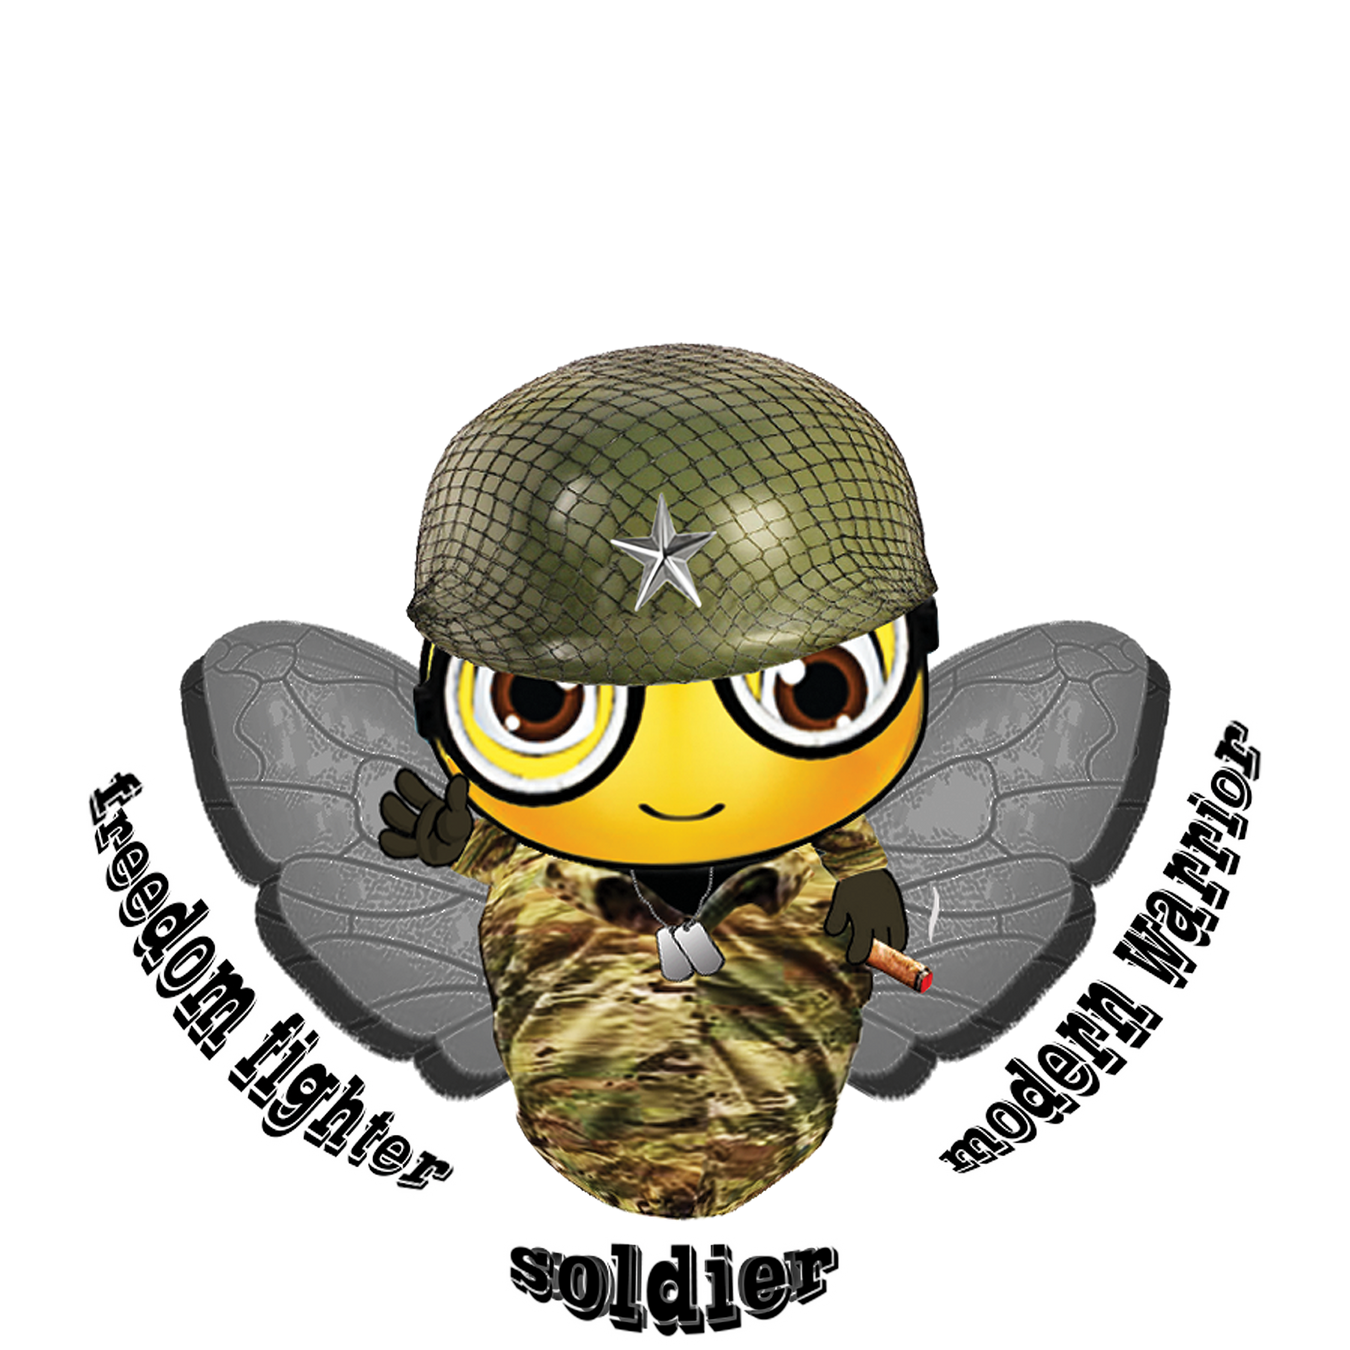 Soldier / Military Bee Collections (kids clothing has no cigar)